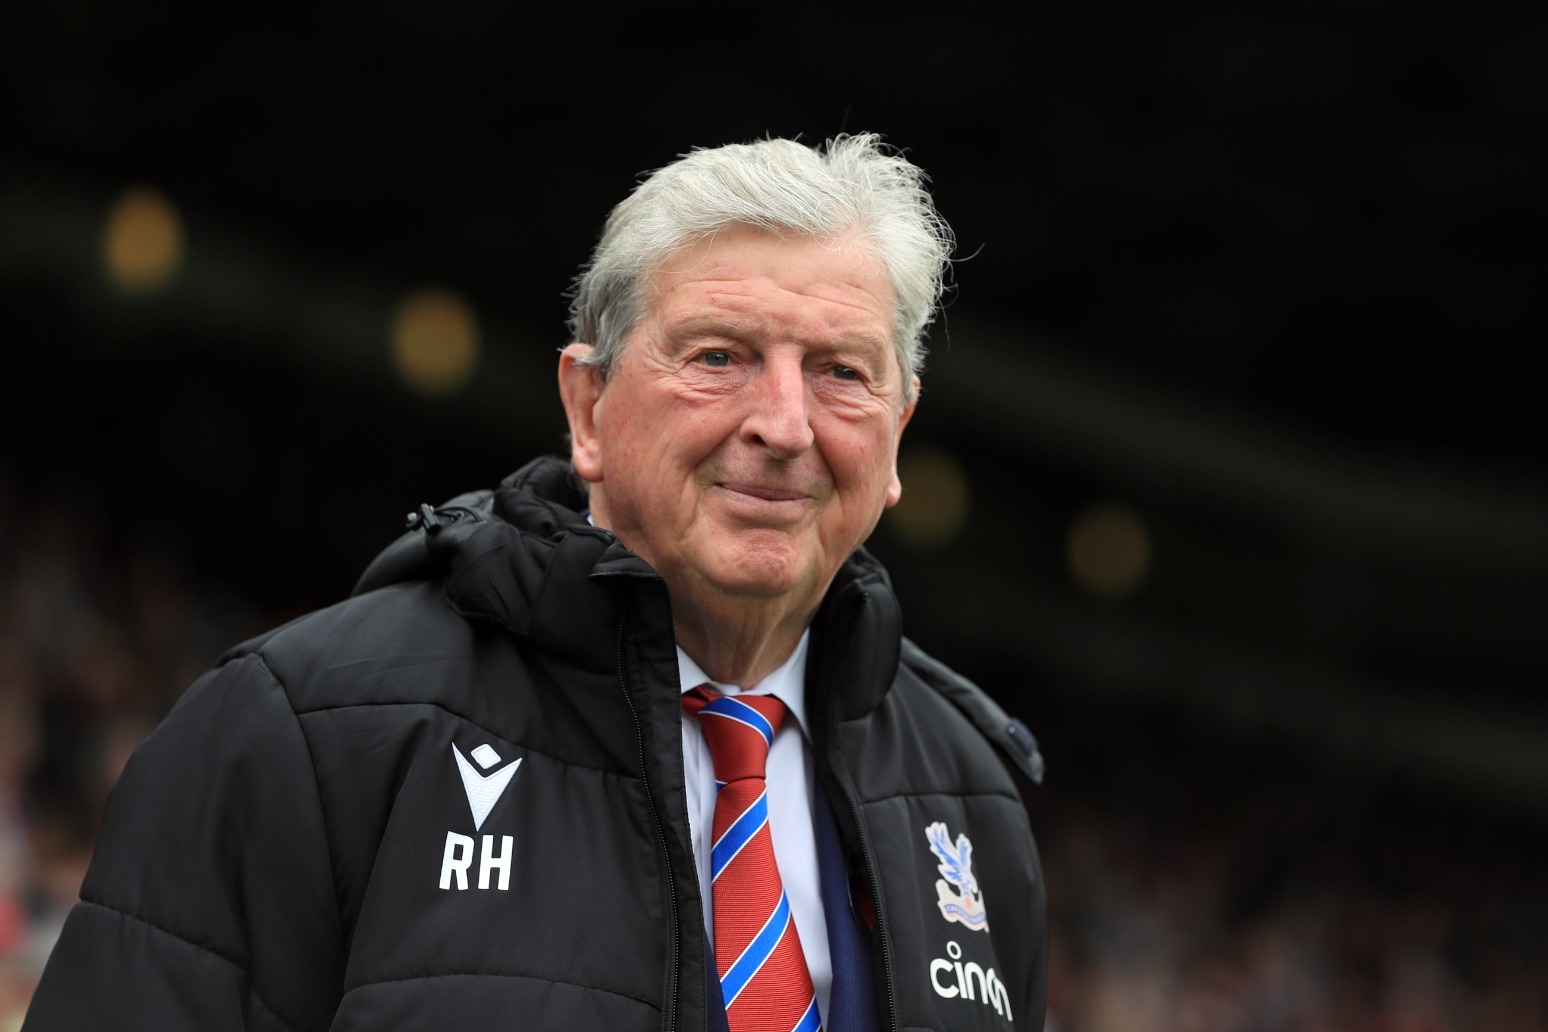 Roy Hodgson targets top-half PL finish after Palace appointment for new season 